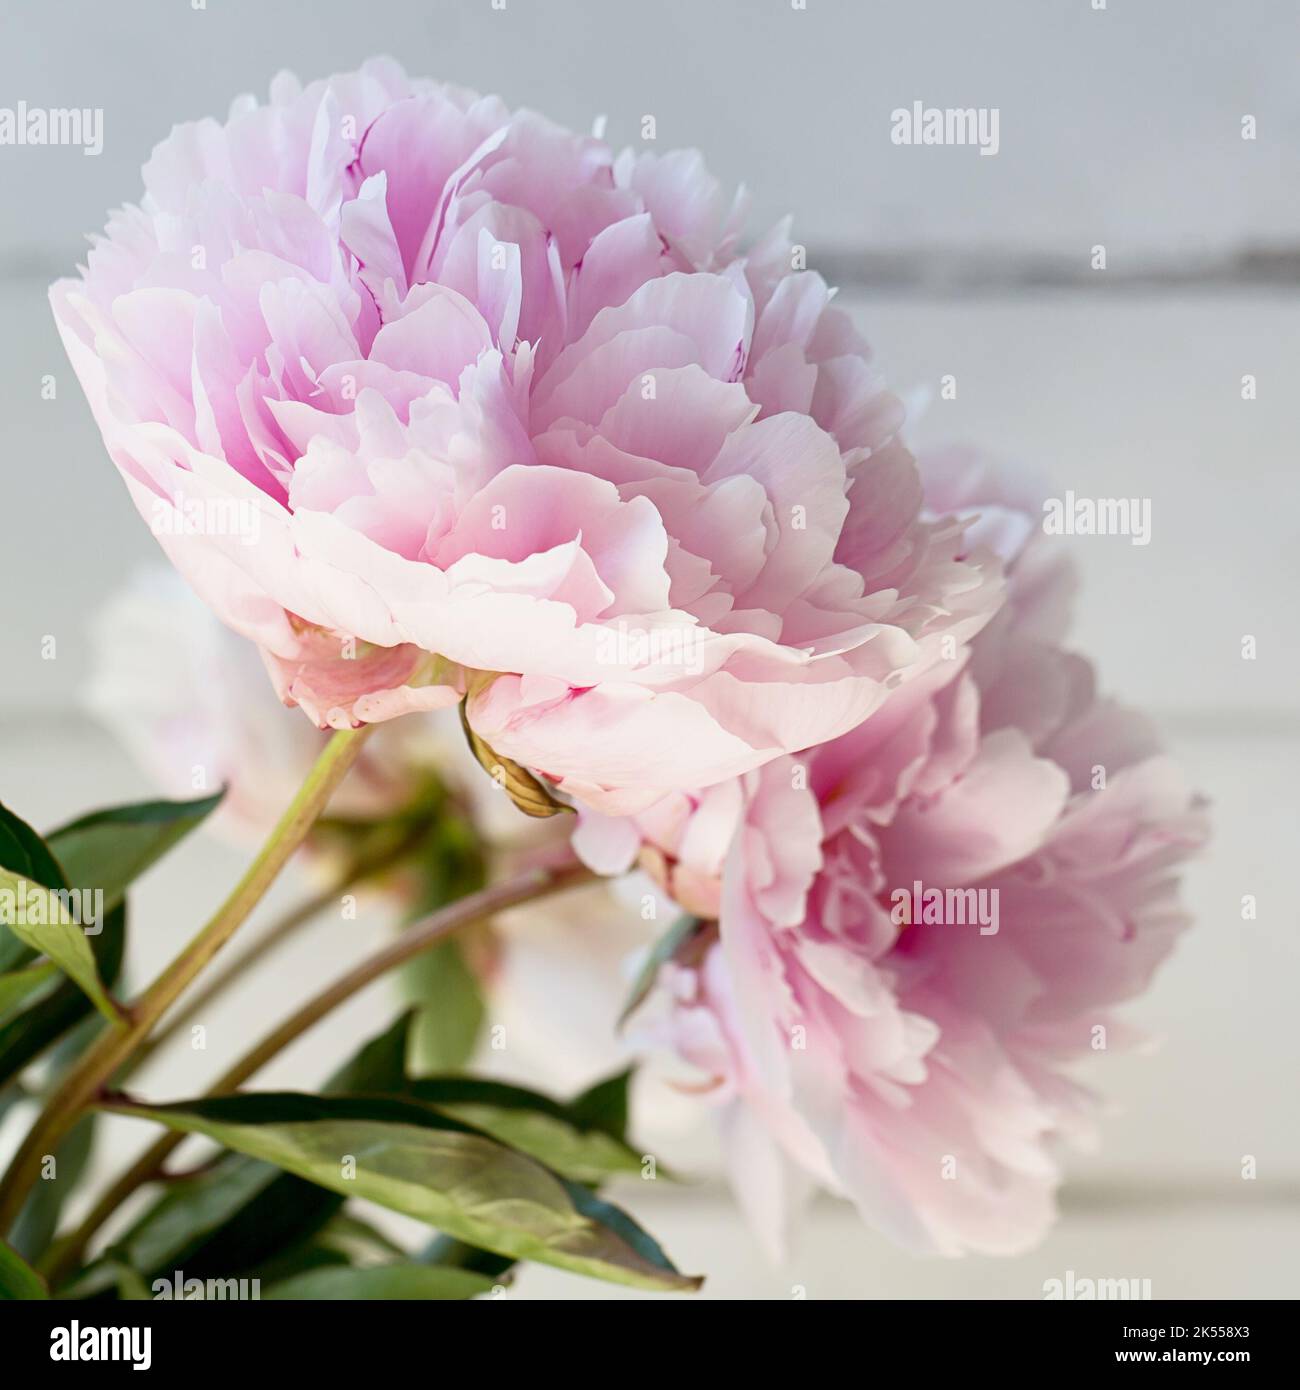 Side view of a bunch of pale pink peony (paeonia) flowers against a whitewashed wooden background Stock Photo